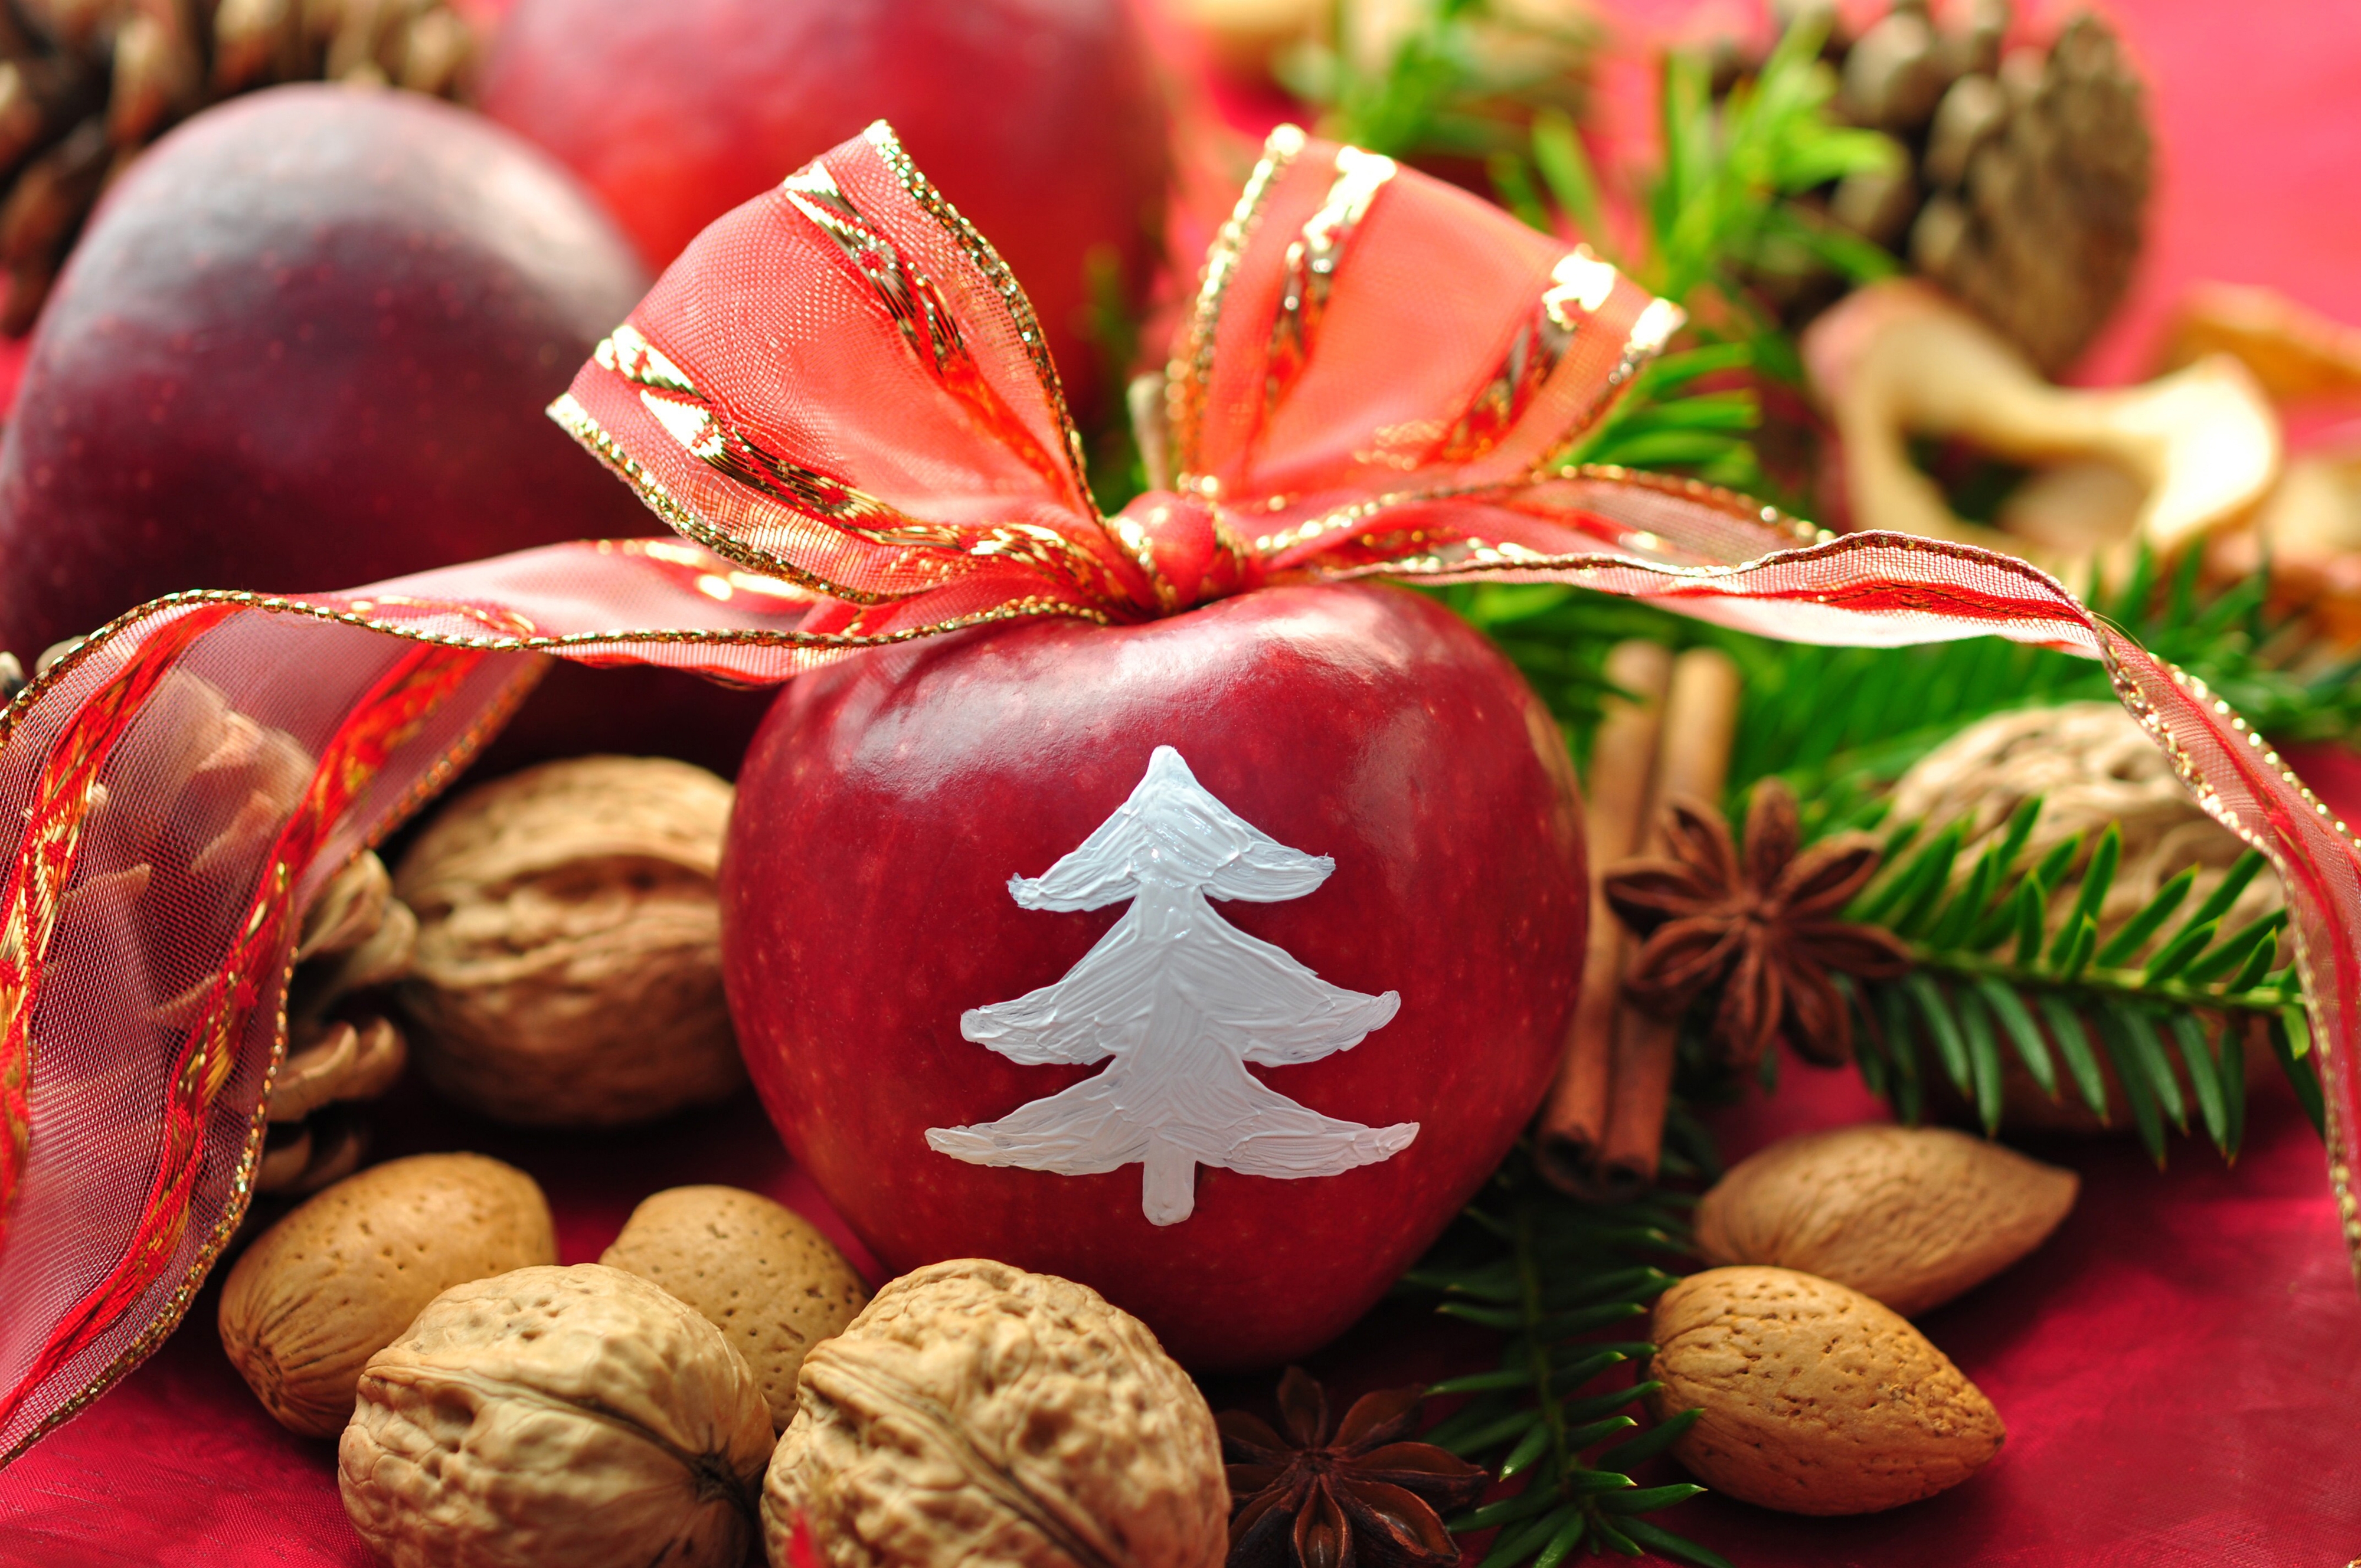 nuts, food, cones, new year, apples, cinnamon, holiday, table, needles, bow, tape, decor